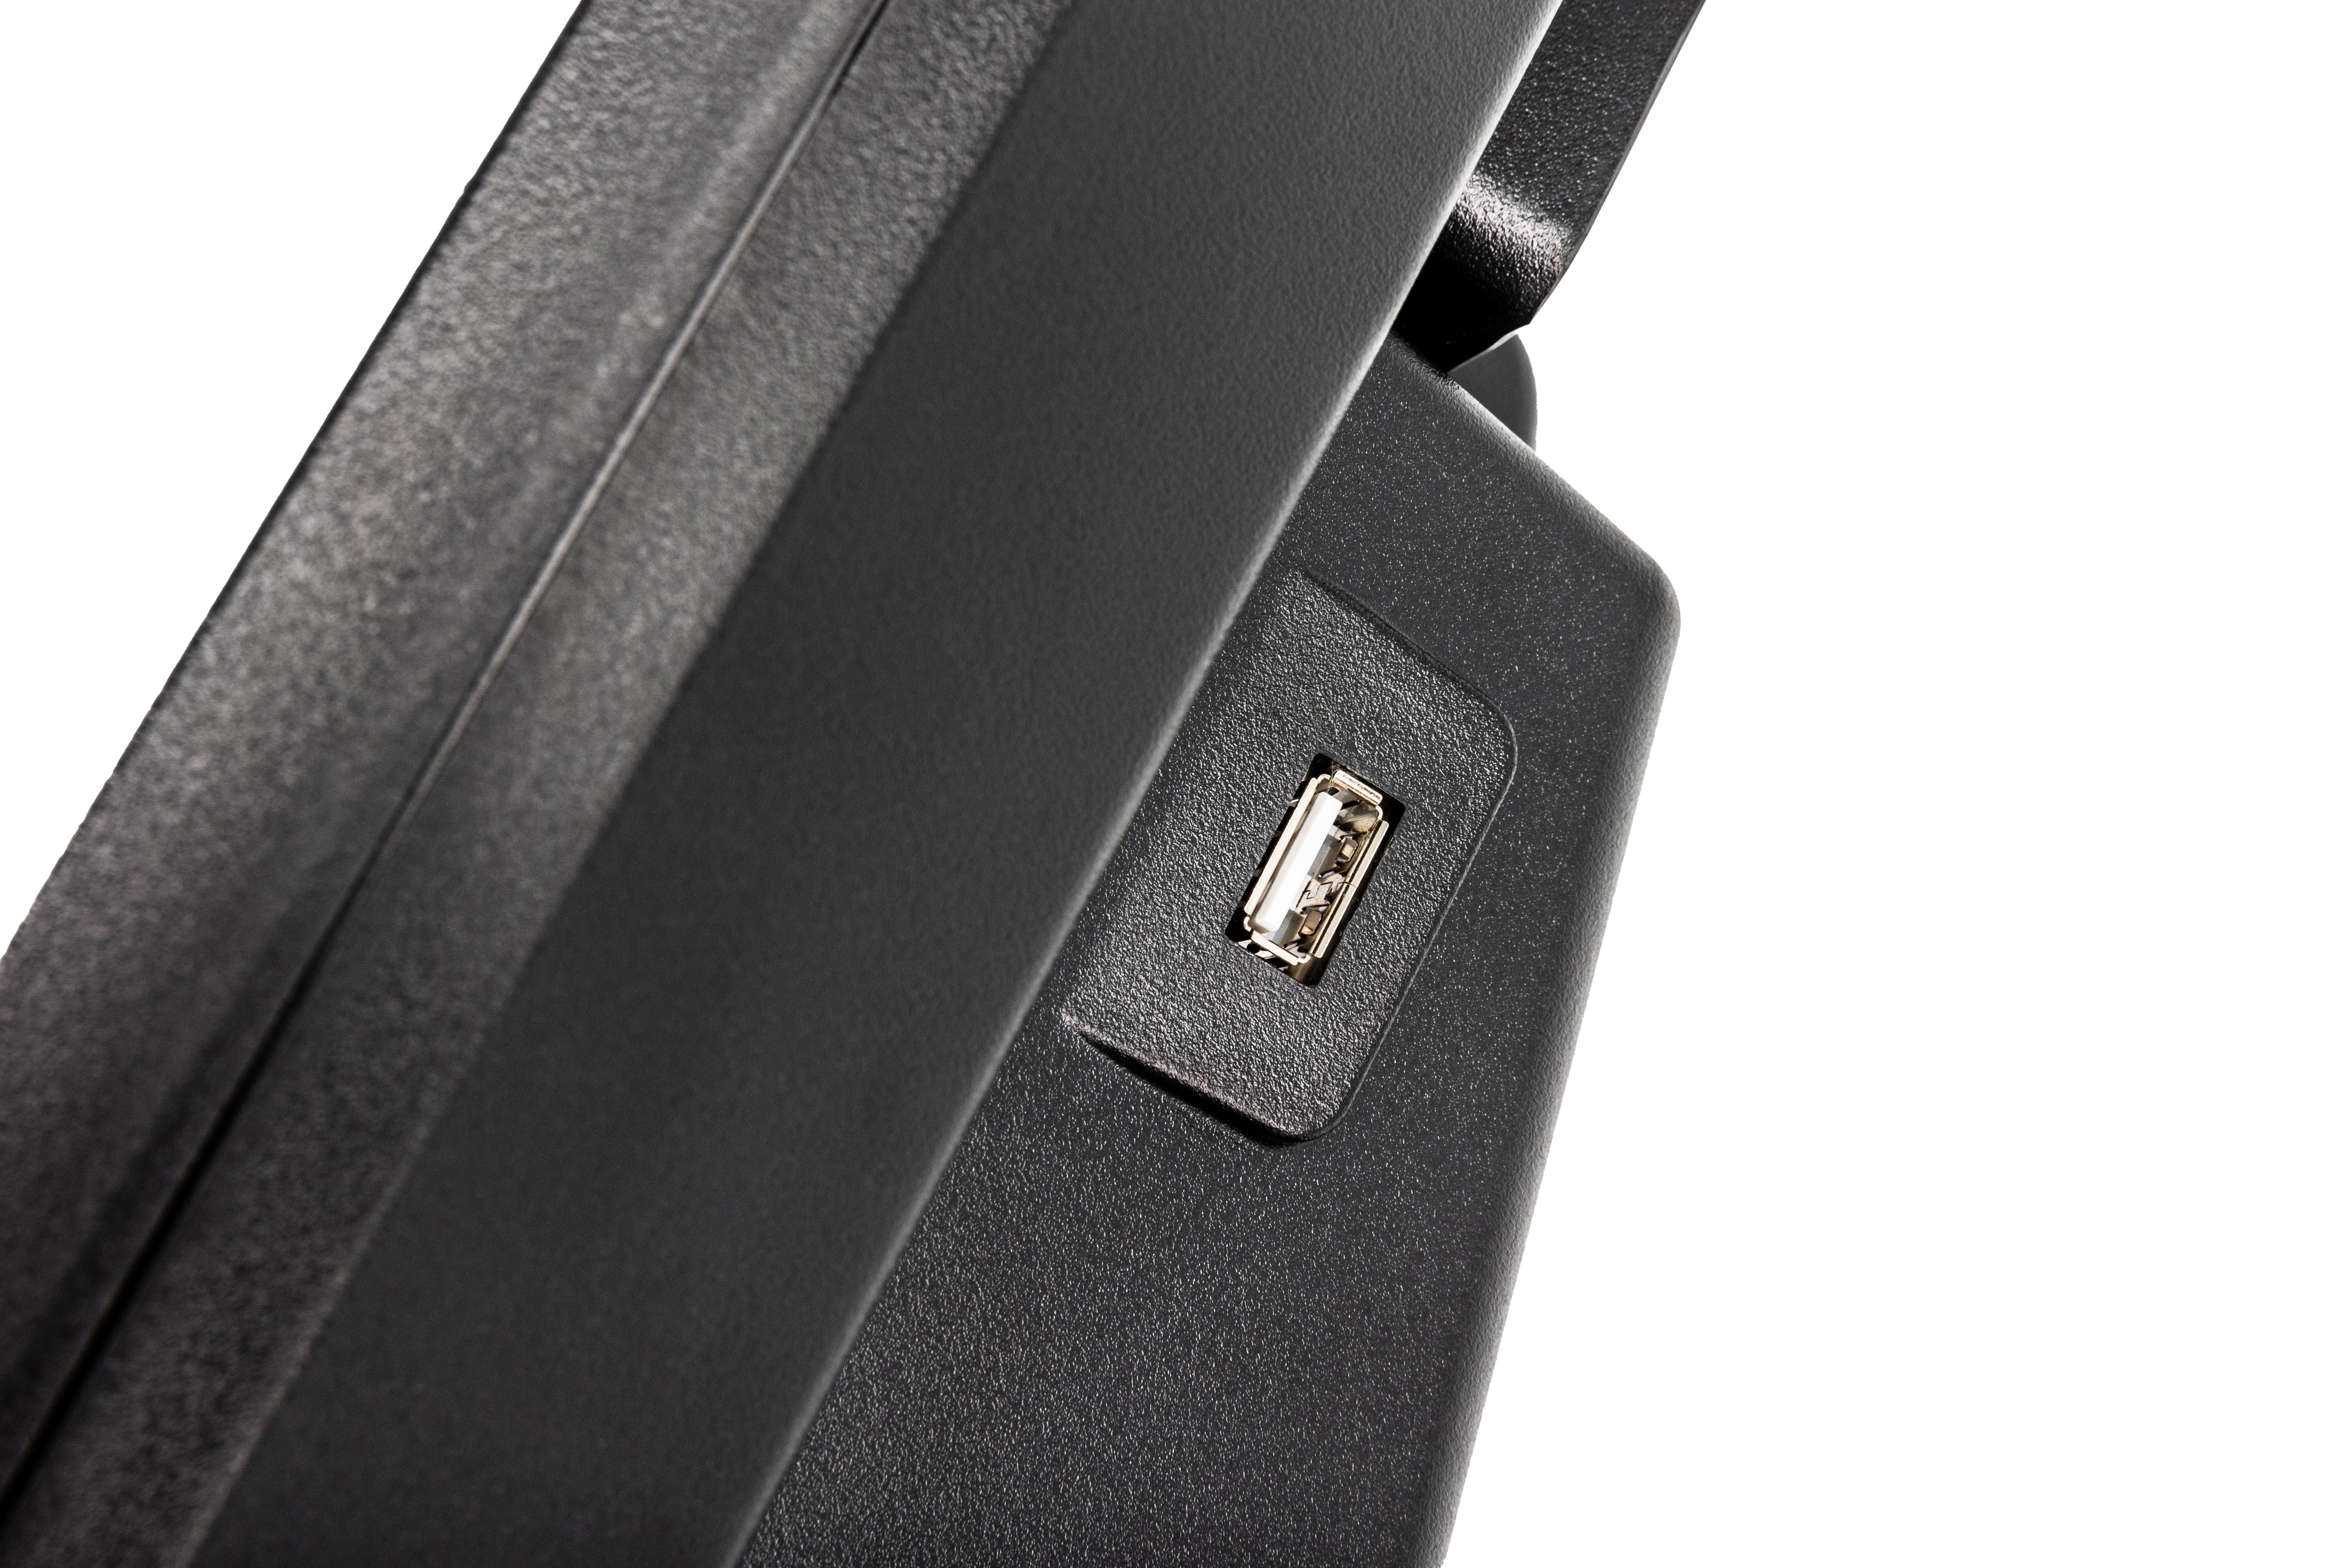 Close-up view of the Sole E25 elliptical trainer's side, showing a textured matte finish and an integrated USB port.